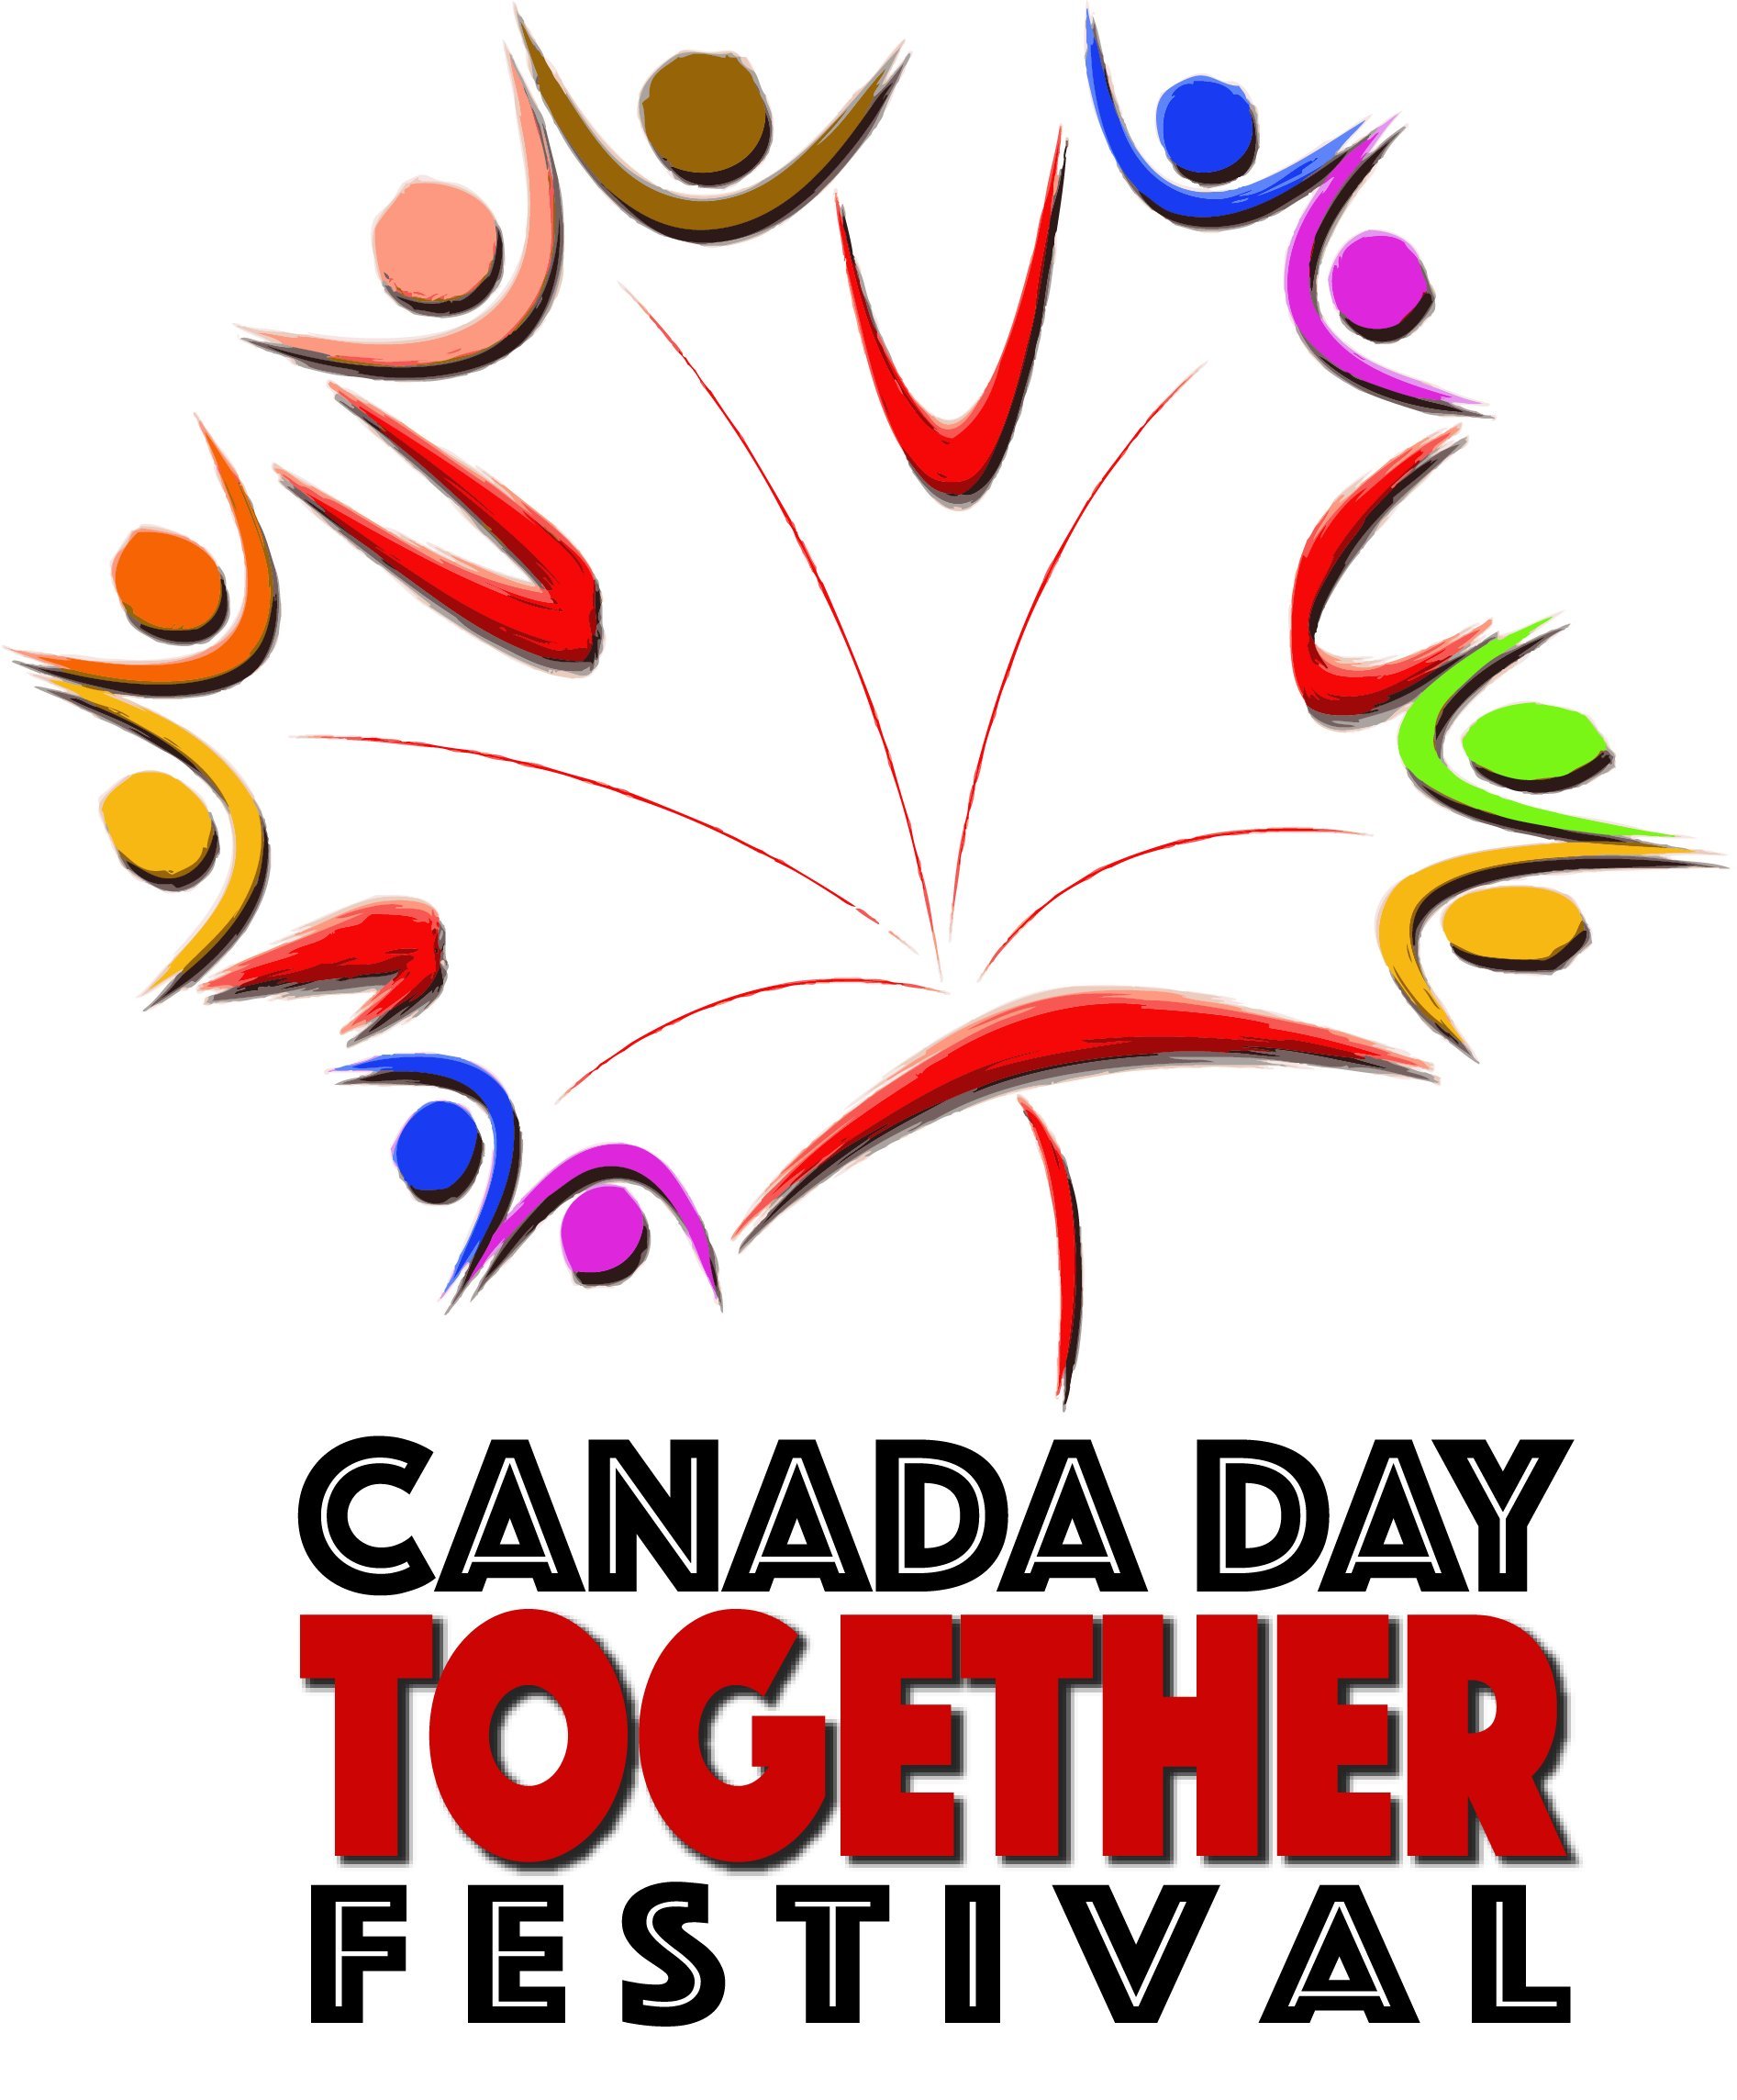 Canada Day Together Festival Google image from http://canadadaytogether.ca/